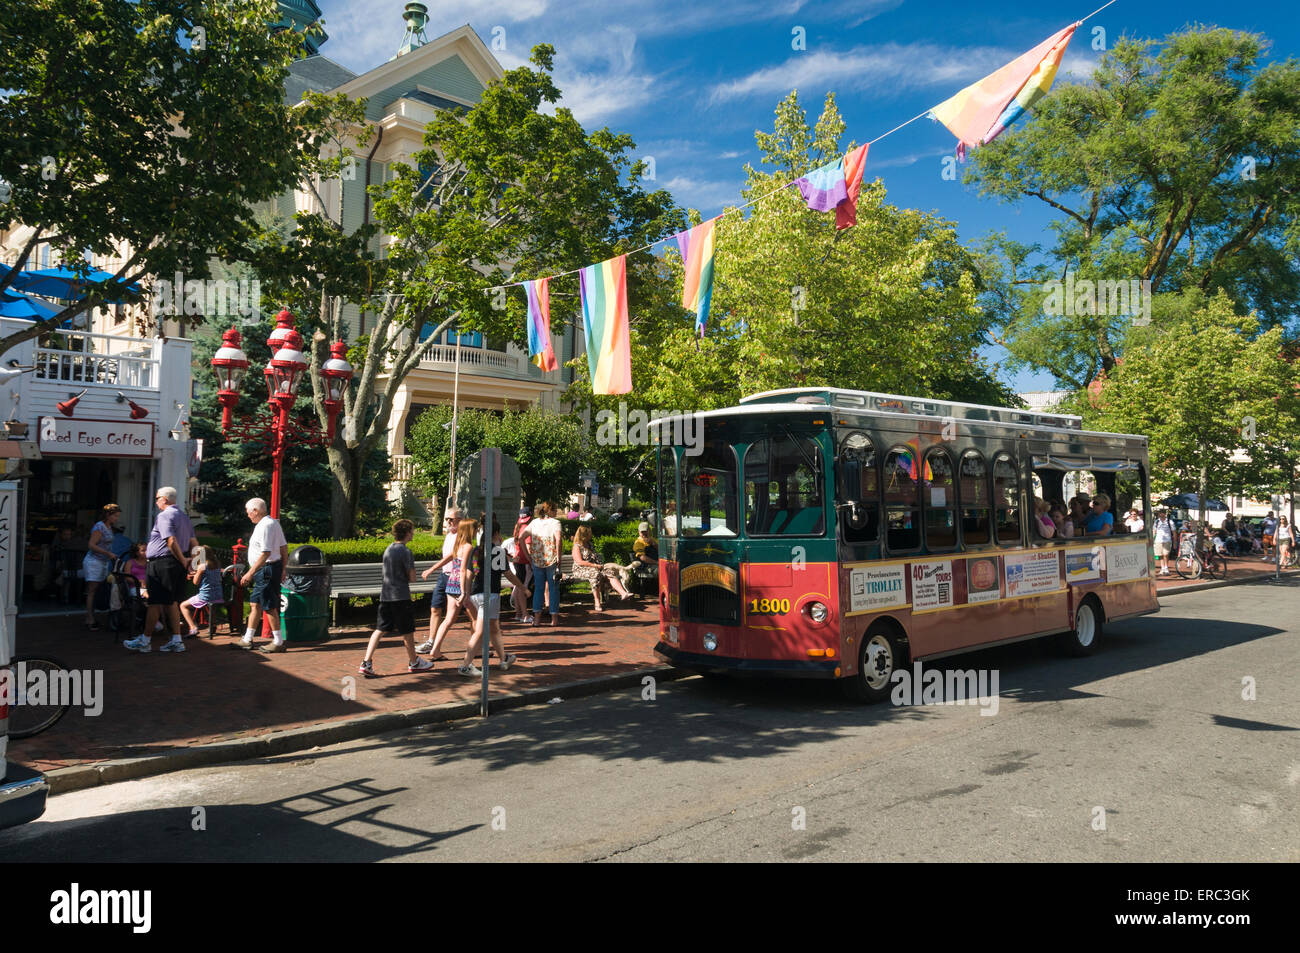 Street scene of Provincetown Cape Cod with tour trolley bus. Stock Photo